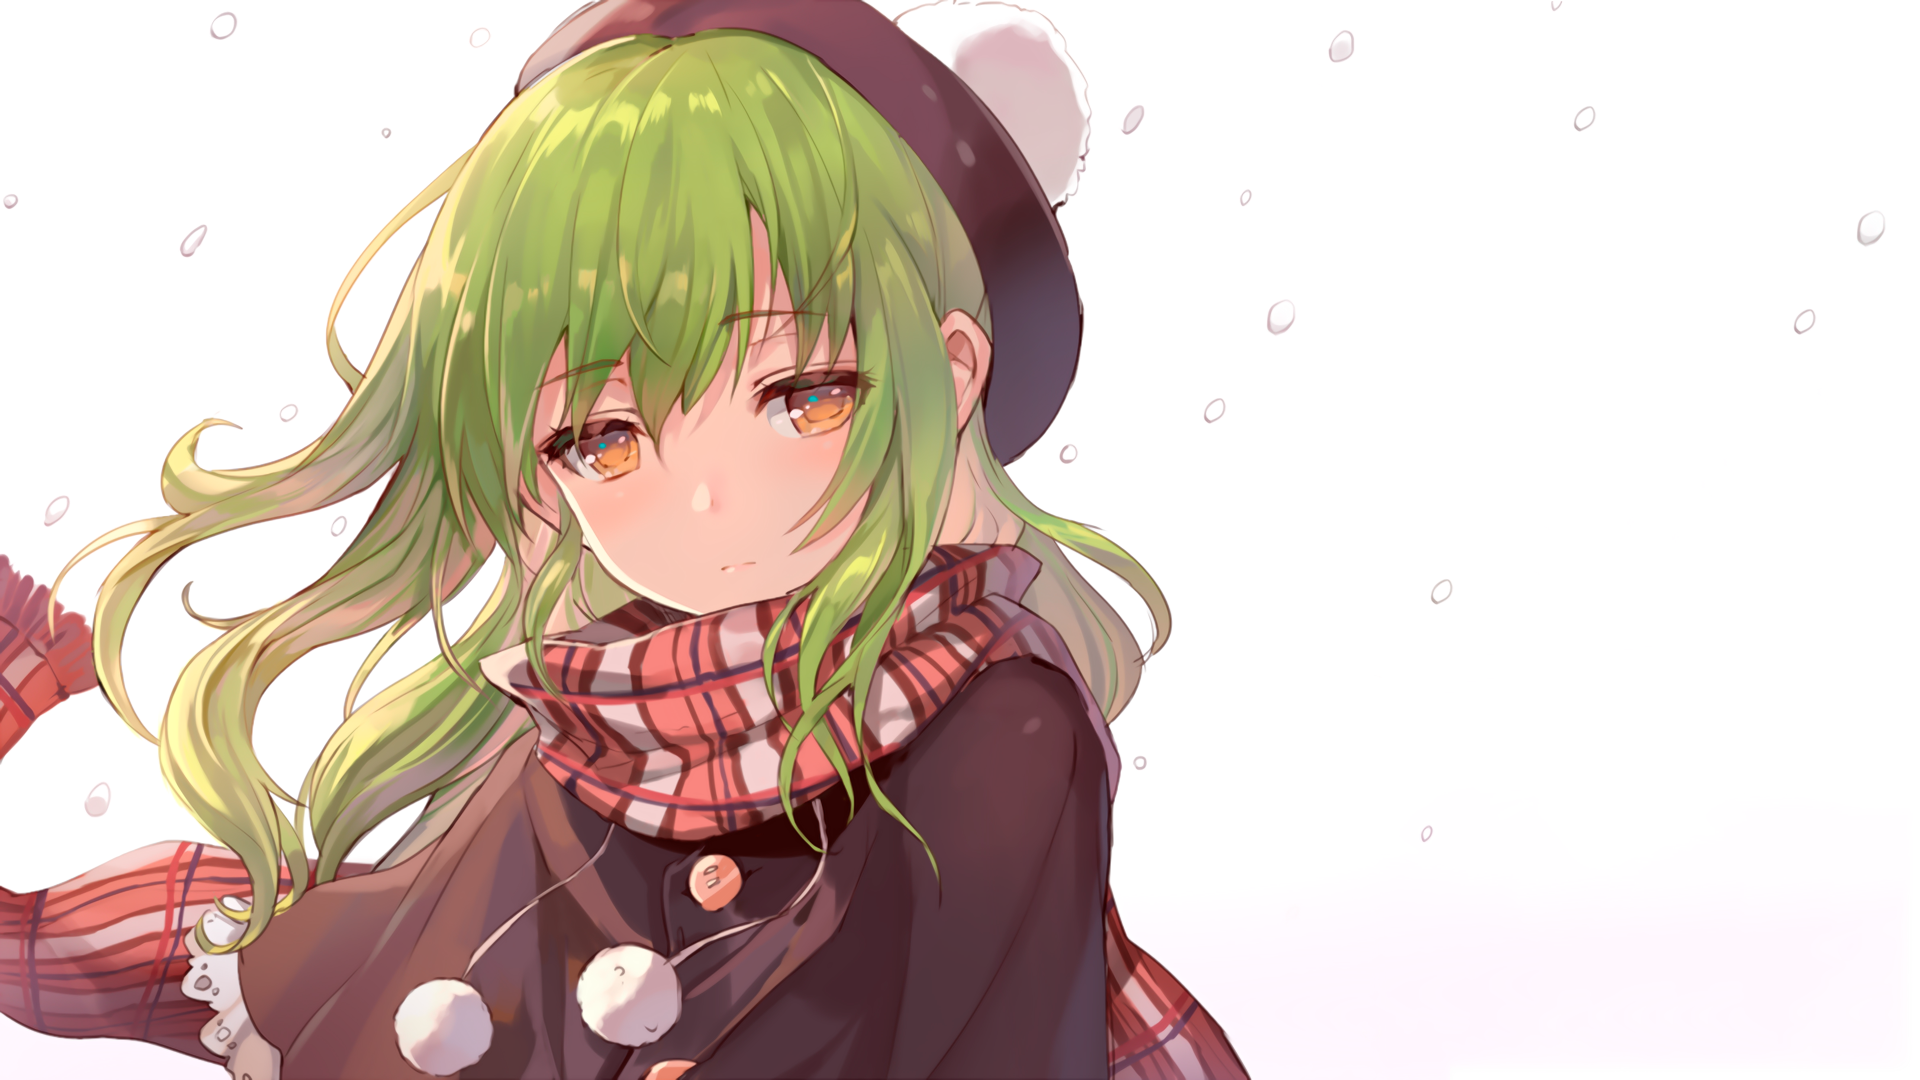 Anime 1920x1080 manga anime girls anime green hair simple background hat women with hats long hair face scarf white background